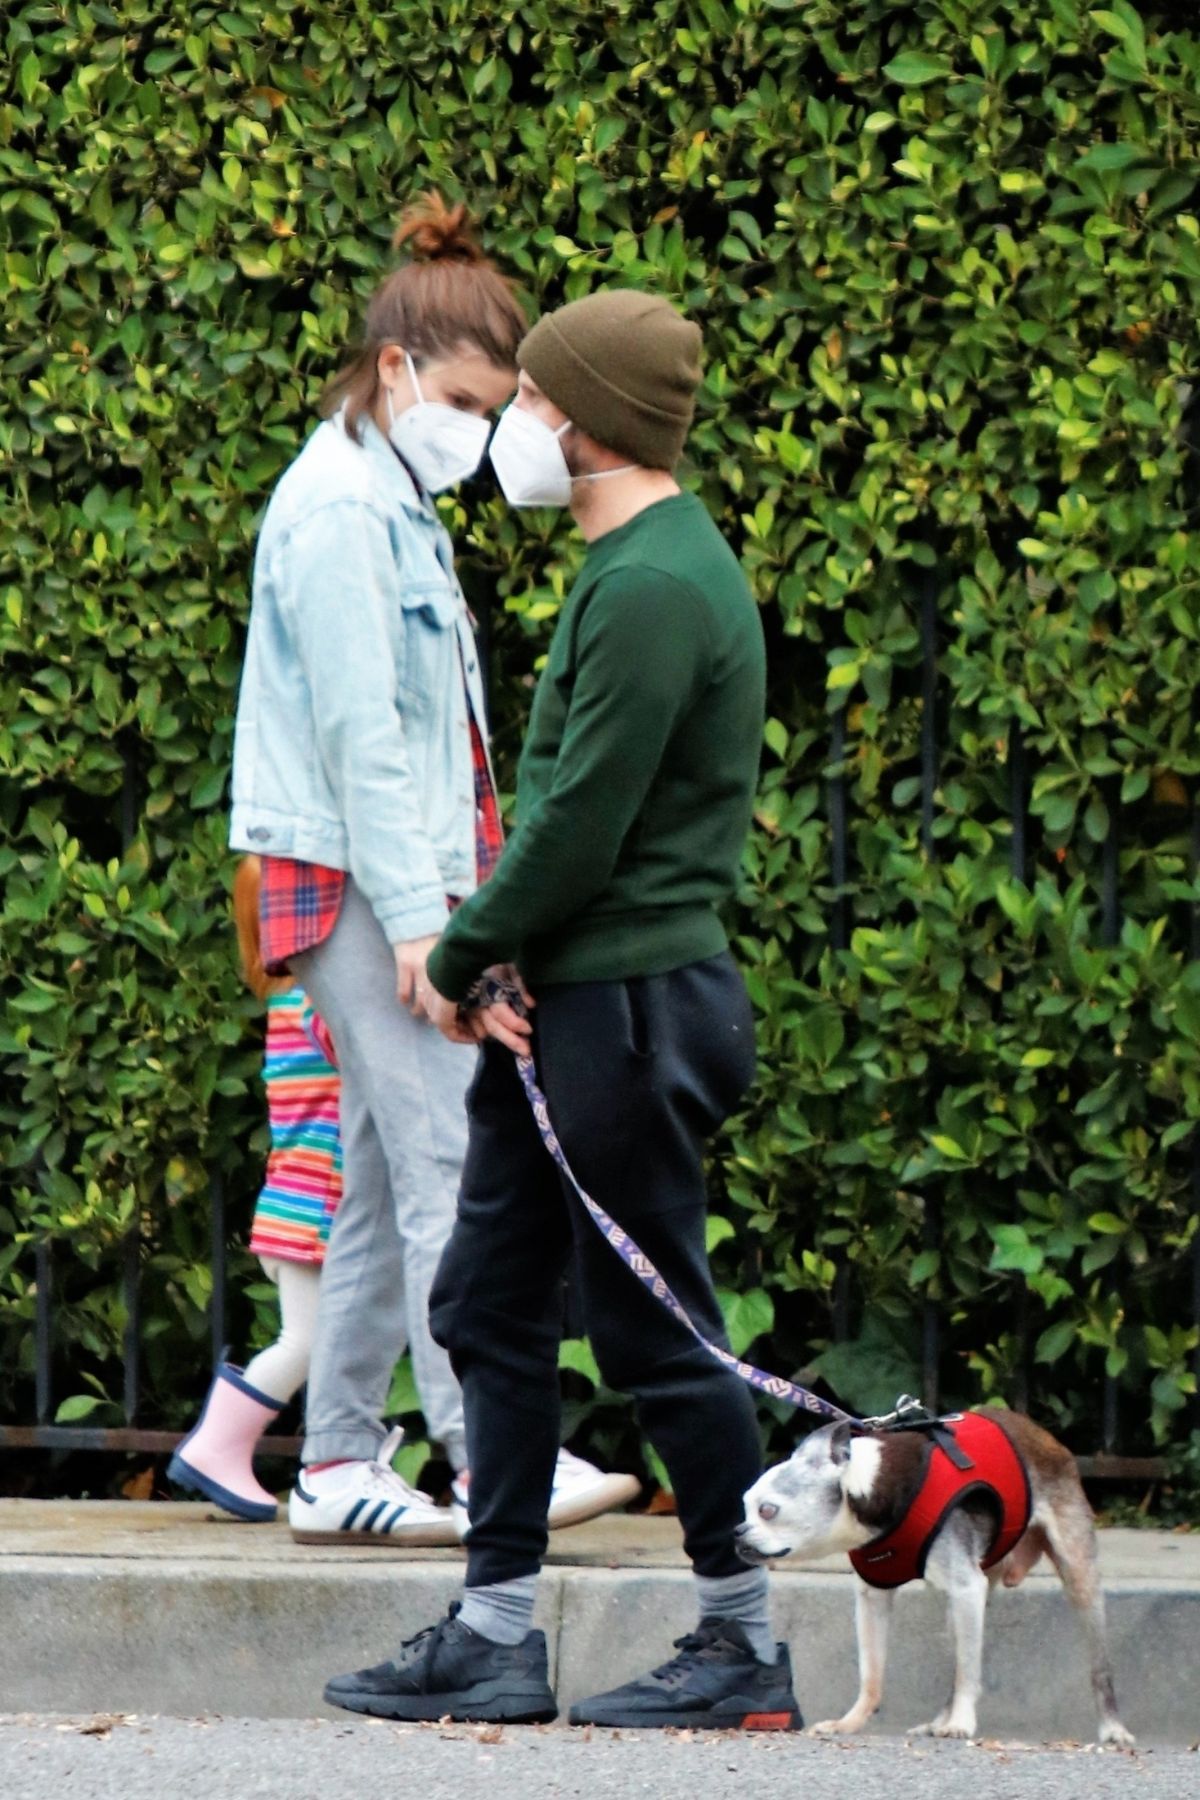 kate-mara-and-jamie-bell-out-at-griffith-park-in-los-feliz-12-30-2020-2.jpg